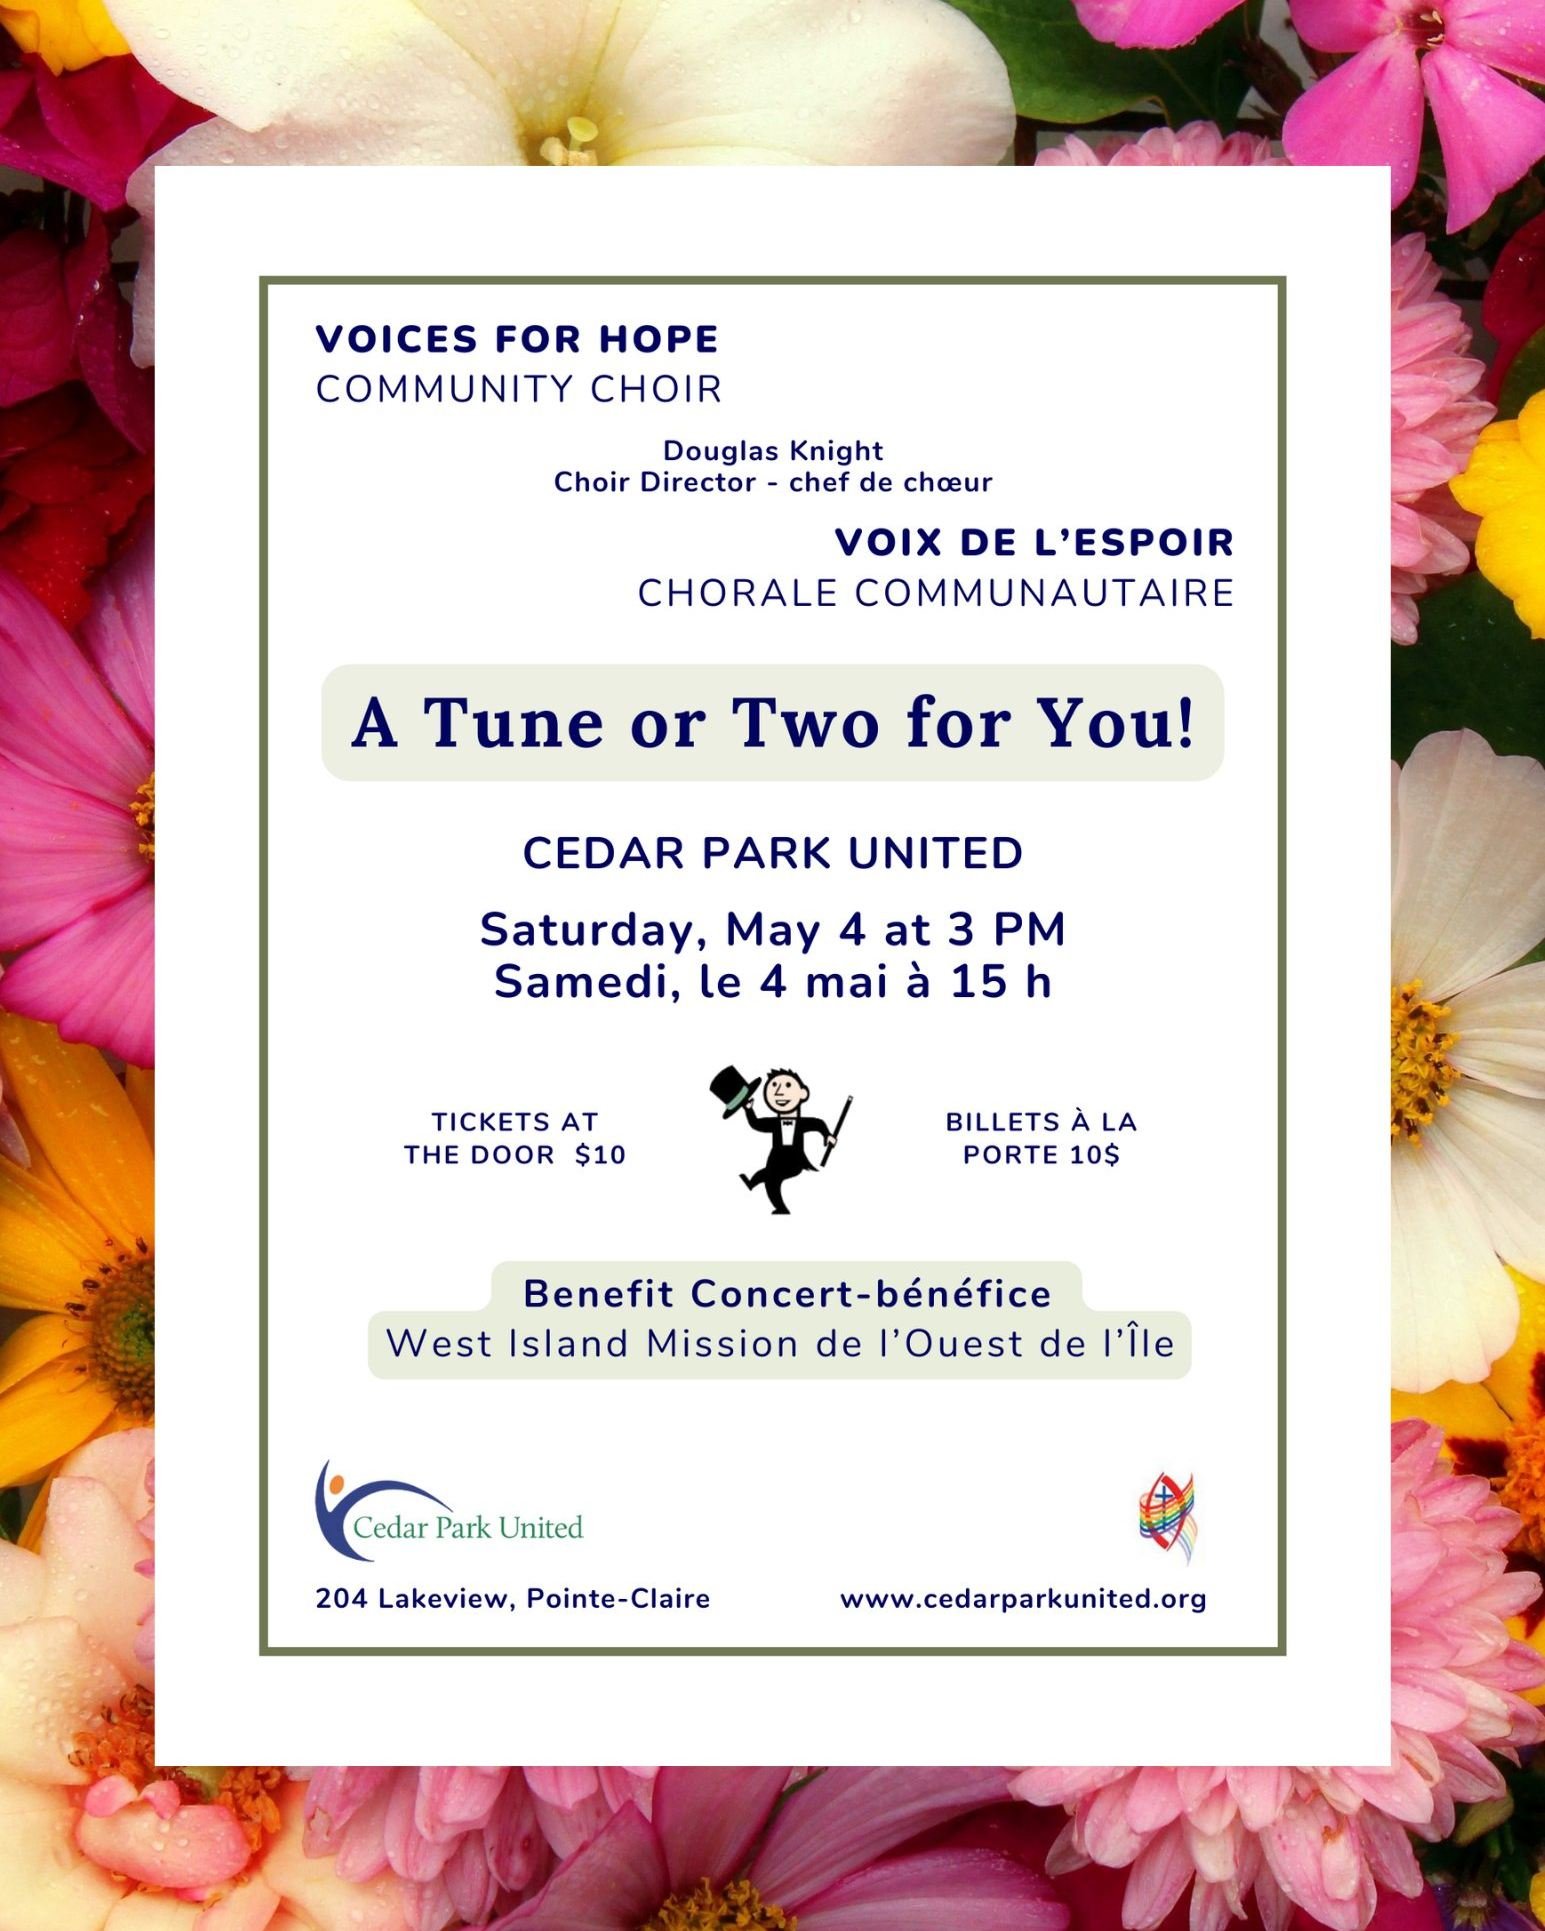 Voices for Hope--A Tune or Two for You!
Saturday, May 4 at 3 PM 🎶

Tickets are $10 at the door to the benefit of the @westislandmission.

Come enjoy a lovely afternoon of musical favourites while supporting this important cause in our local communit